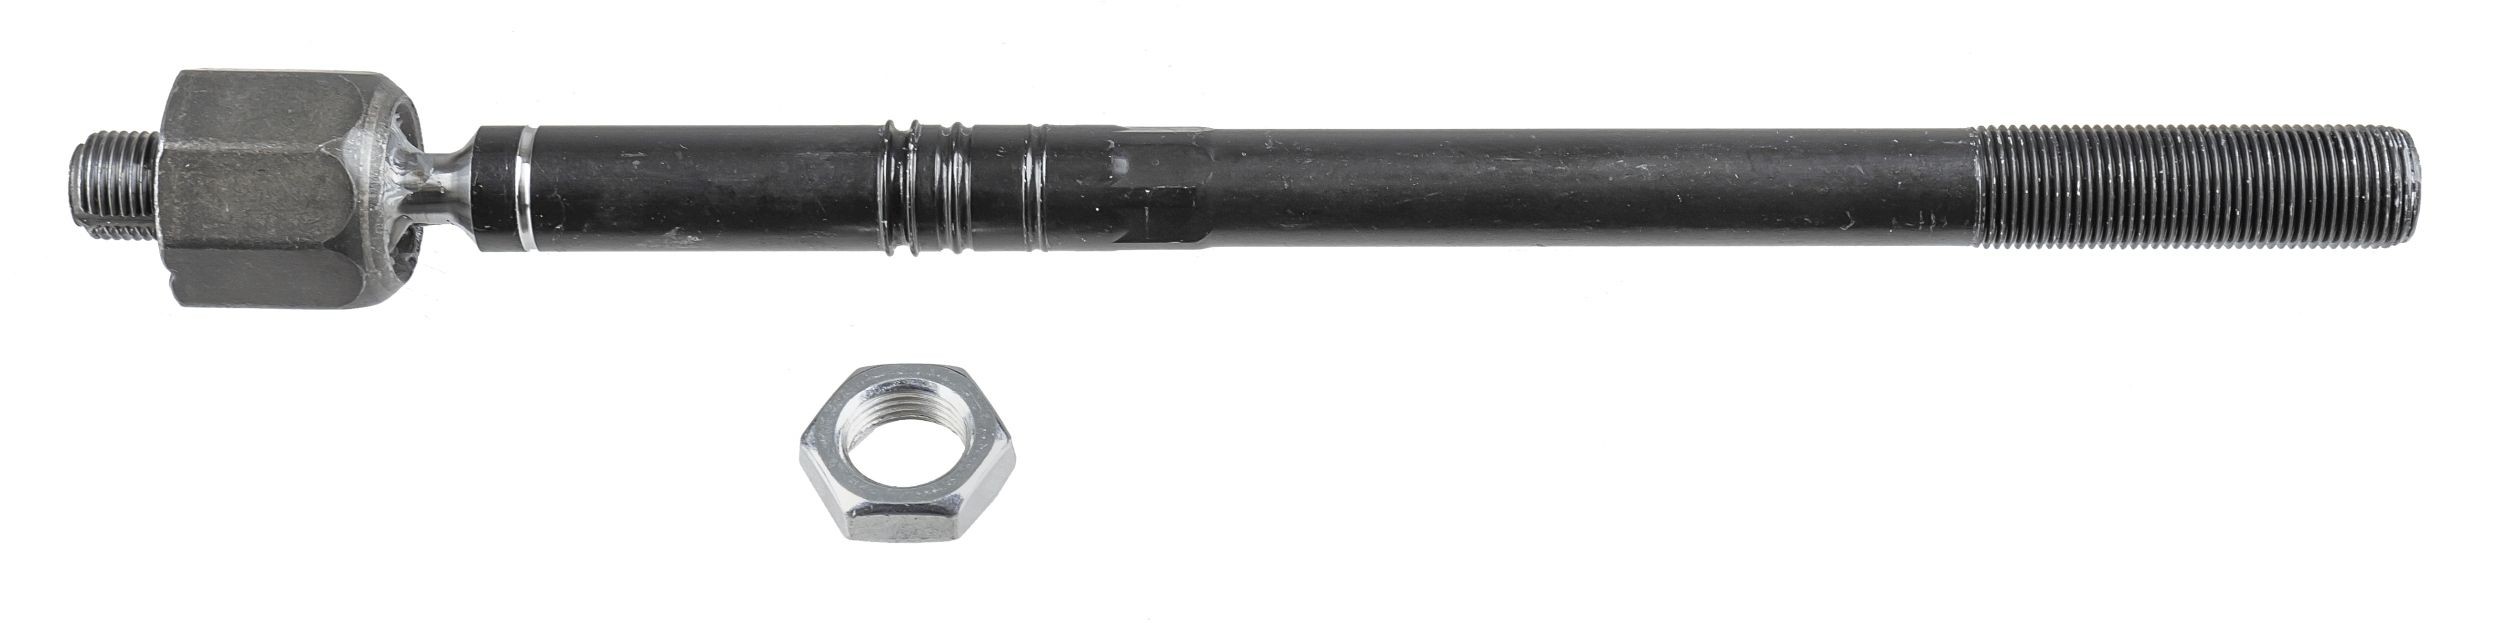 LEMFÖRDER Front Axle, both sides, M18x1,5, 295 mm, for vehicles with electro-hydraulic steering Tie rod axle joint 34659 01 buy